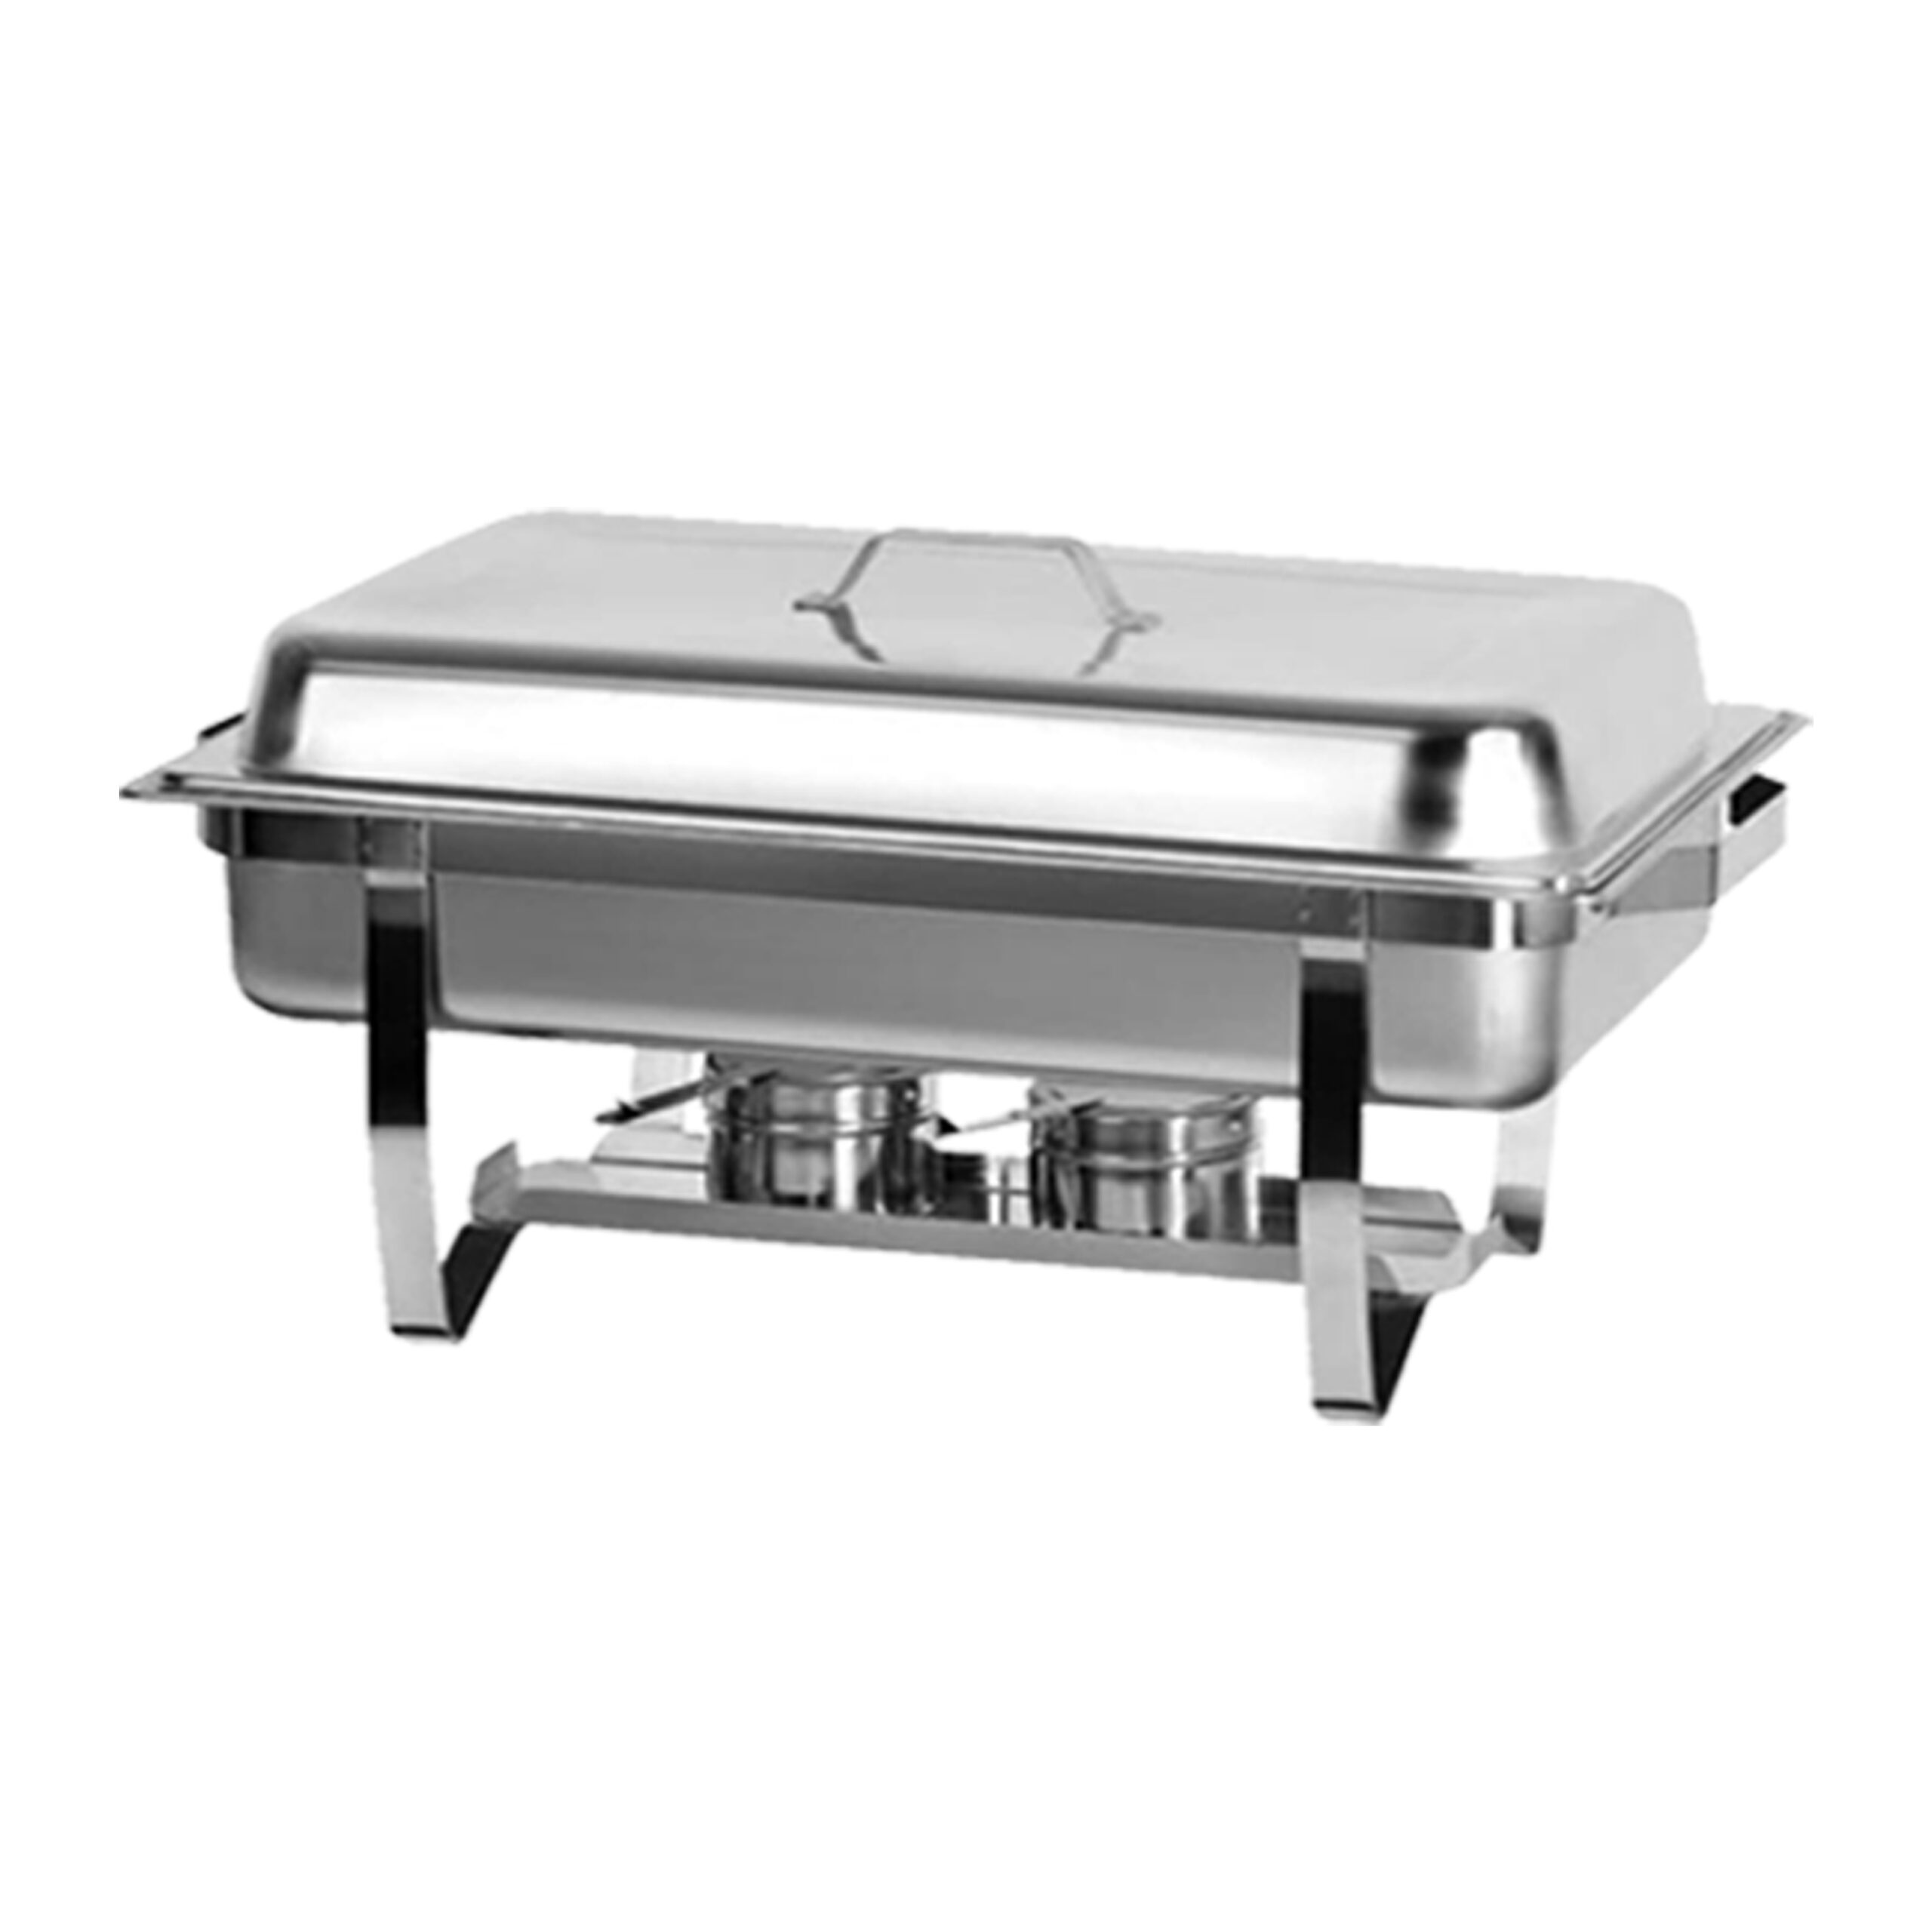 NICE ONE  STAINLESS STEEL SINGLE CHAFING DISH  11L